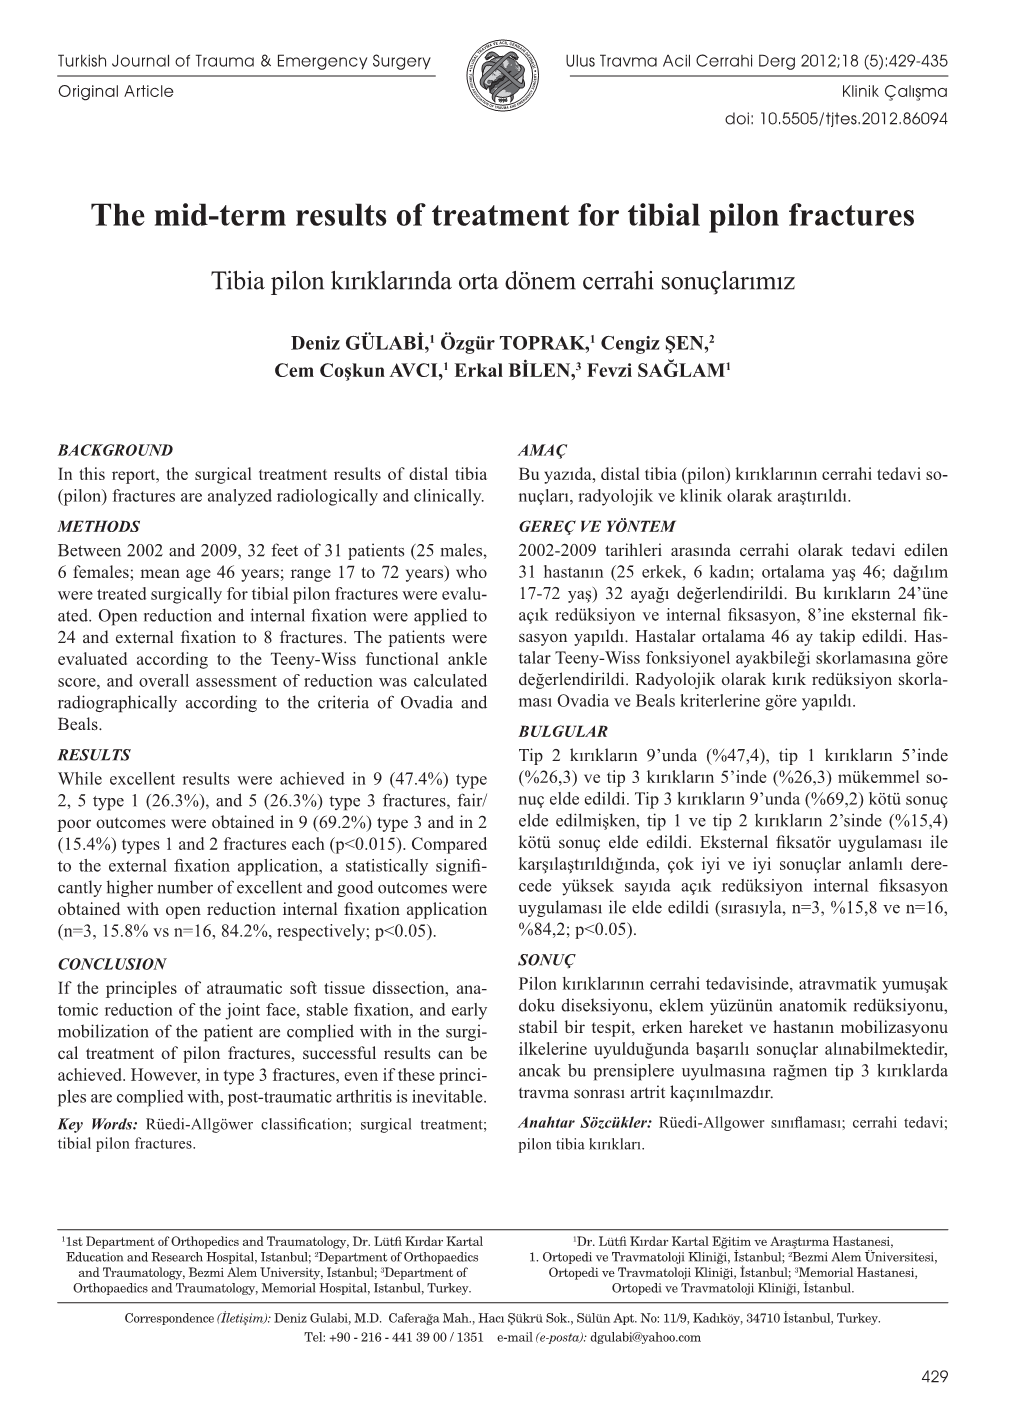 The Mid-Term Results of Treatment for Tibial Pilon Fractures